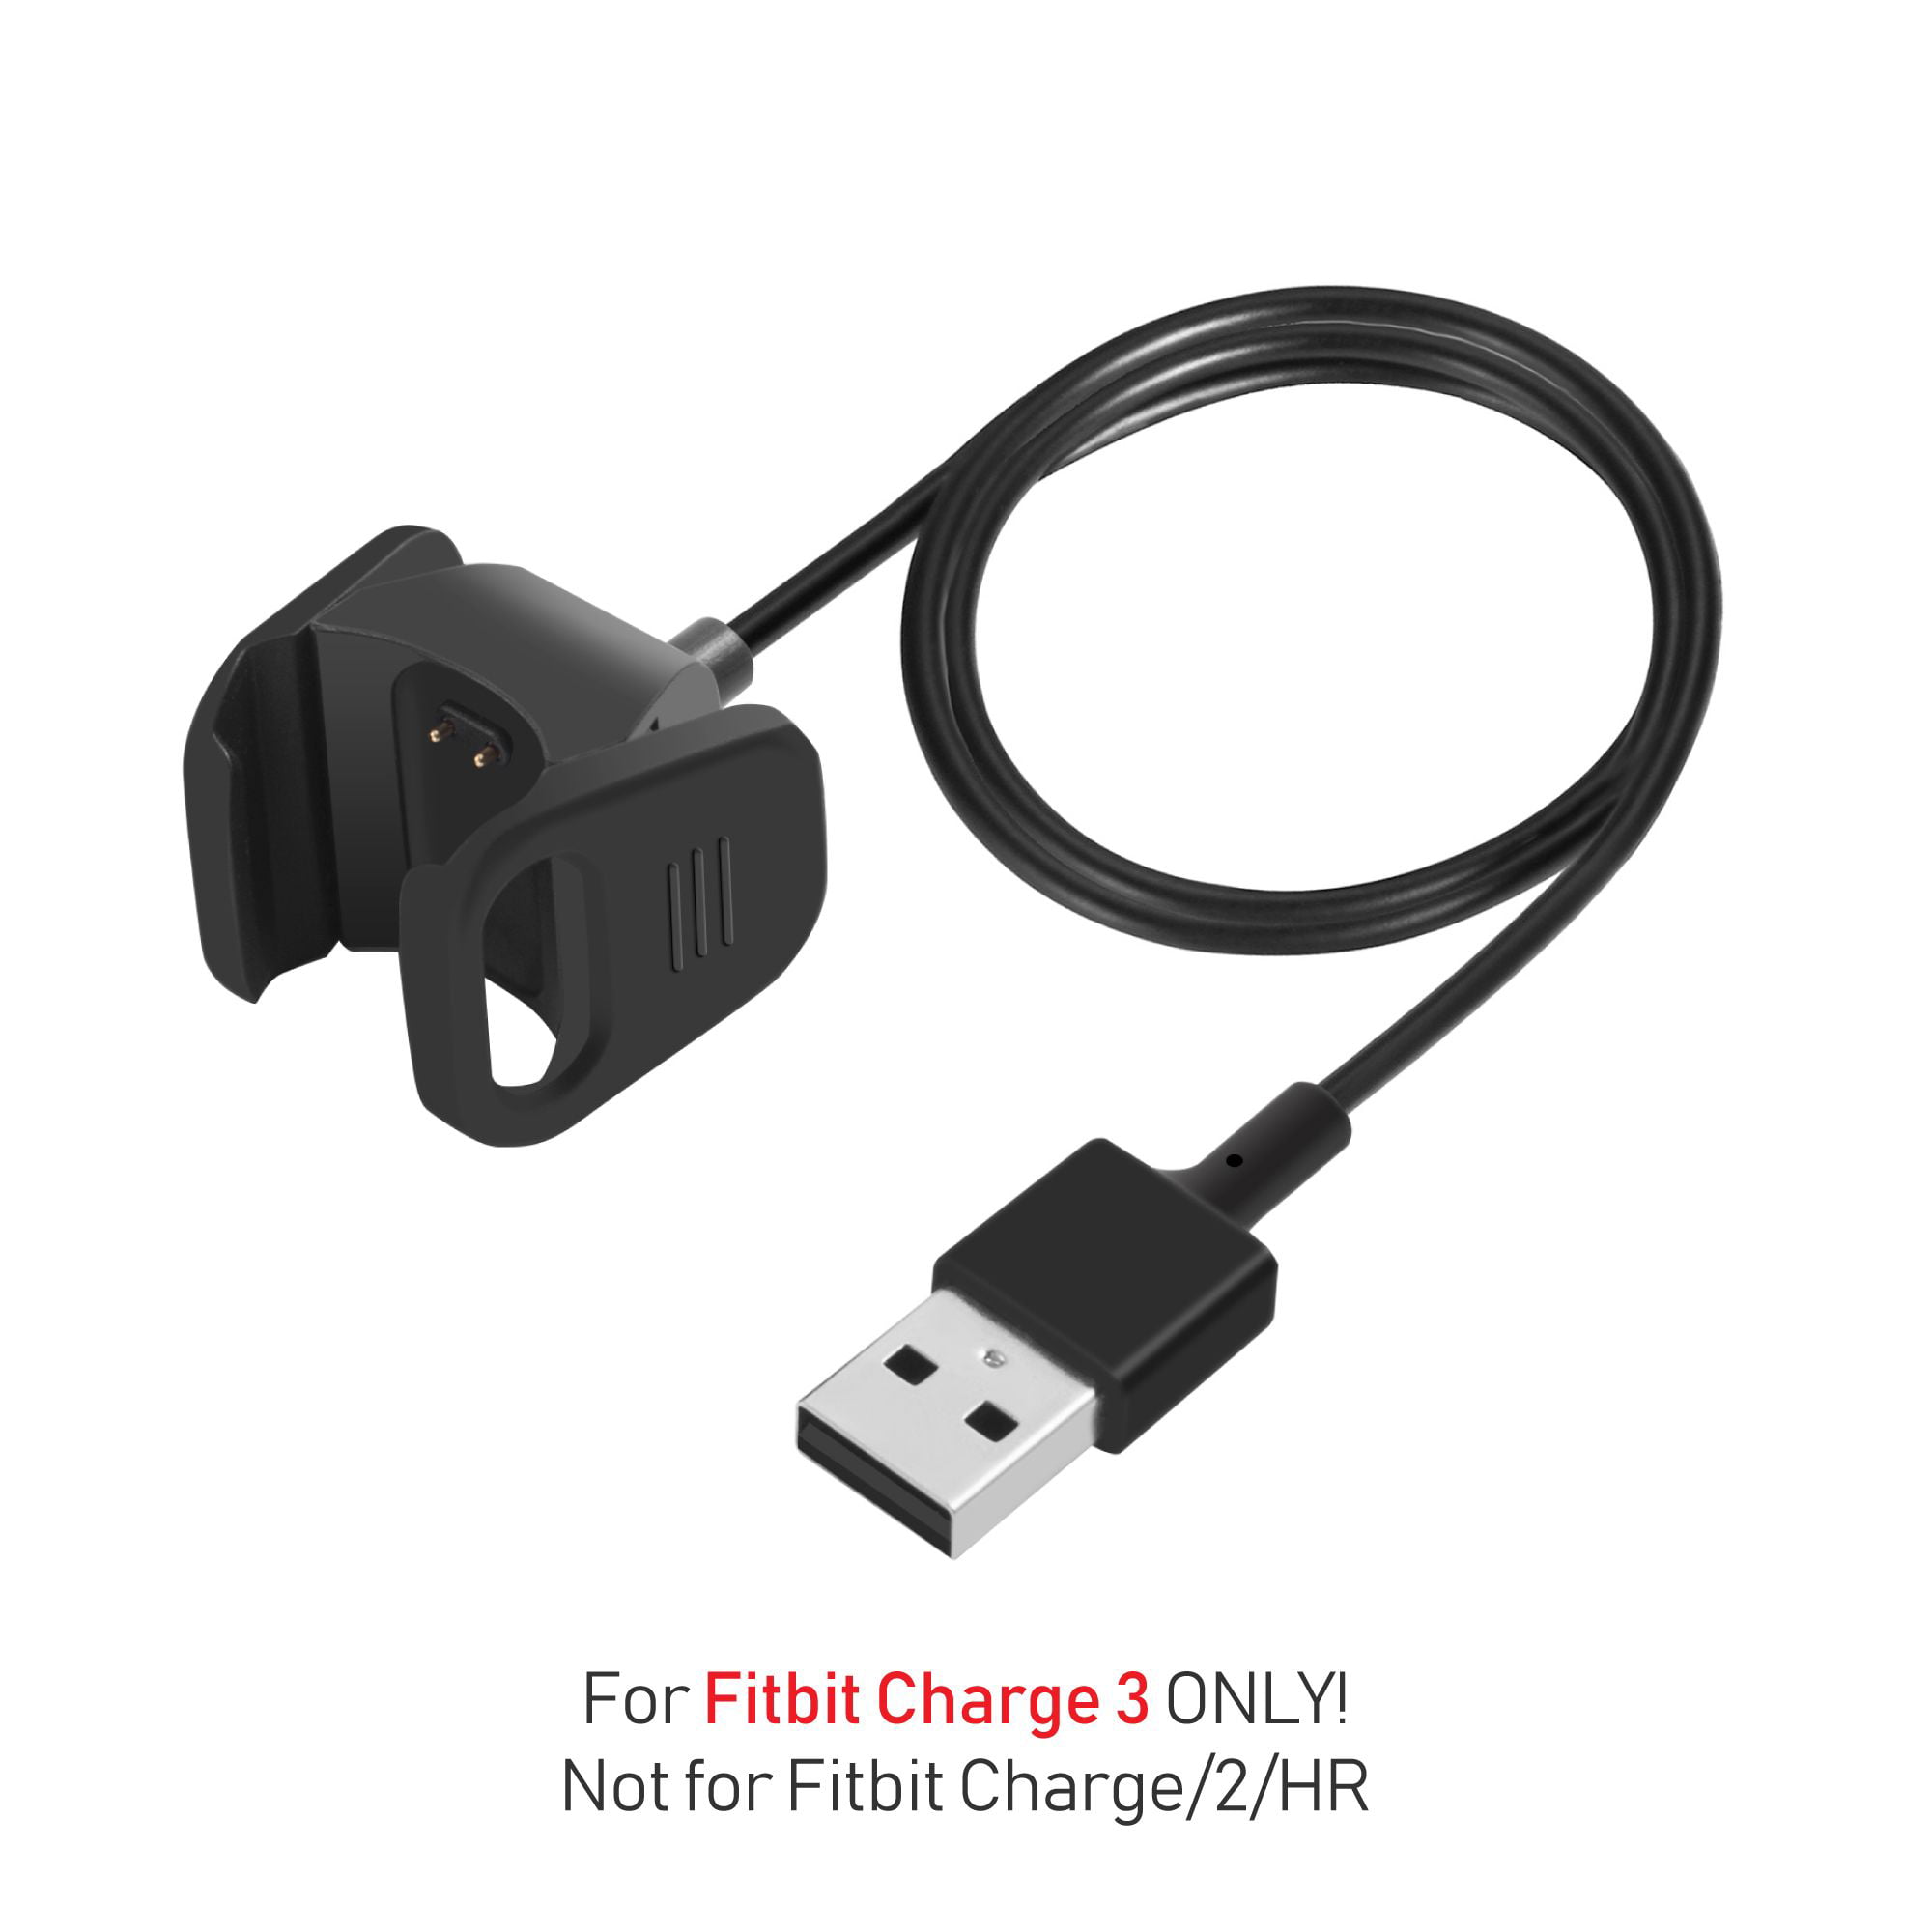 2 Pack Fitbit Charge 2 Replacement USB Charger Charging Cable Dock 1.8FT 